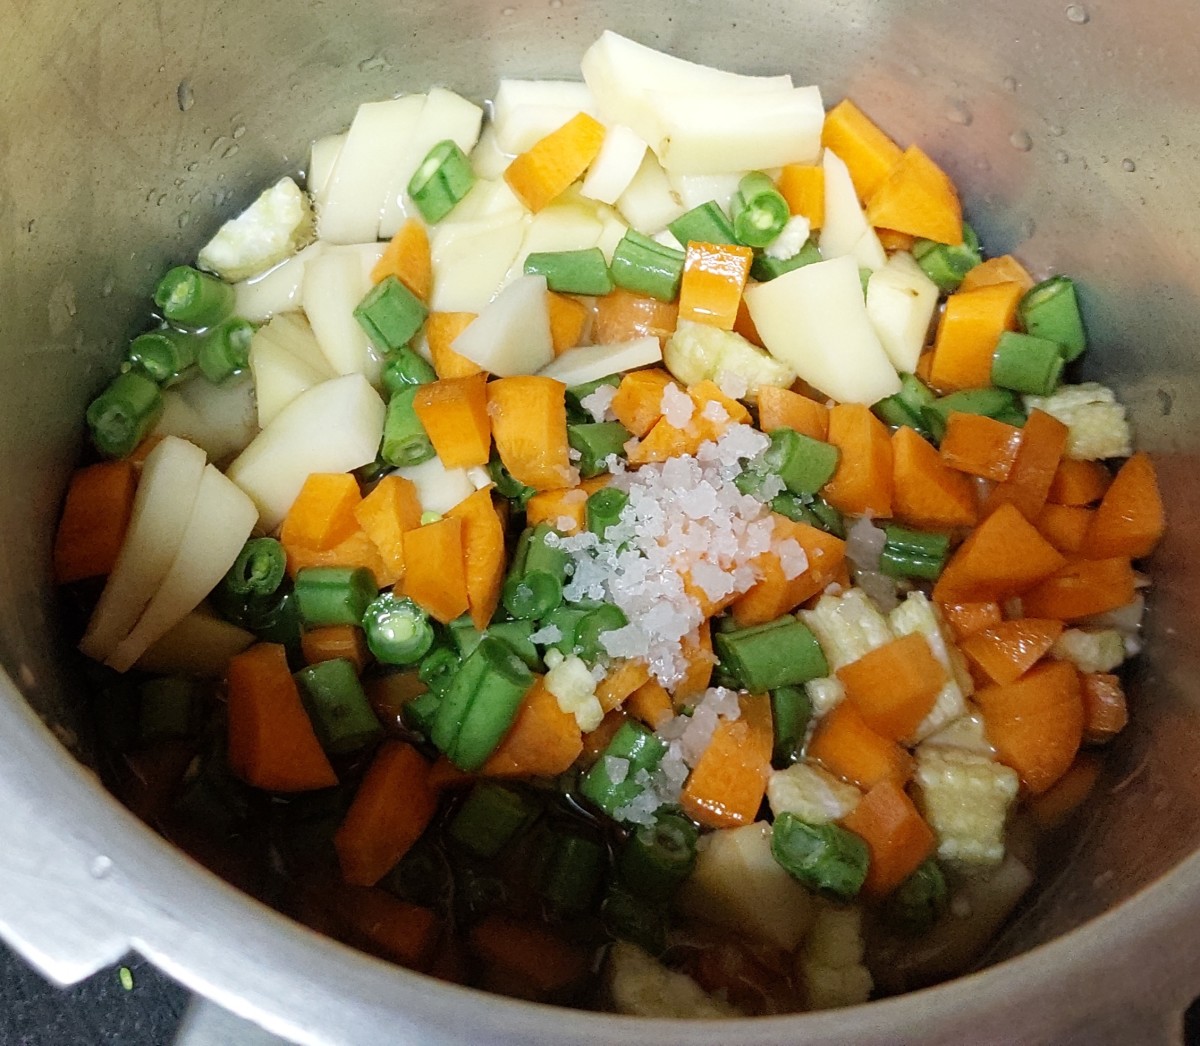 Transfer all of the vegetables to a cooker. Add water and salt.